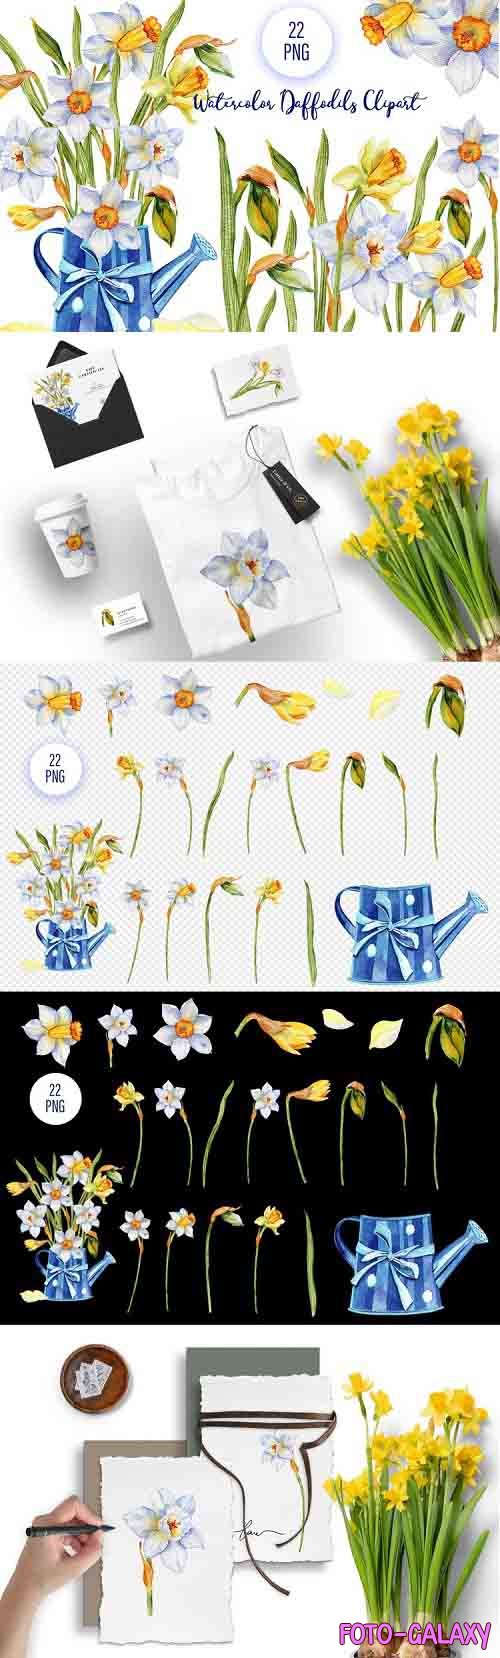 Daffodils watercolor blue flowers clipart - 1262501